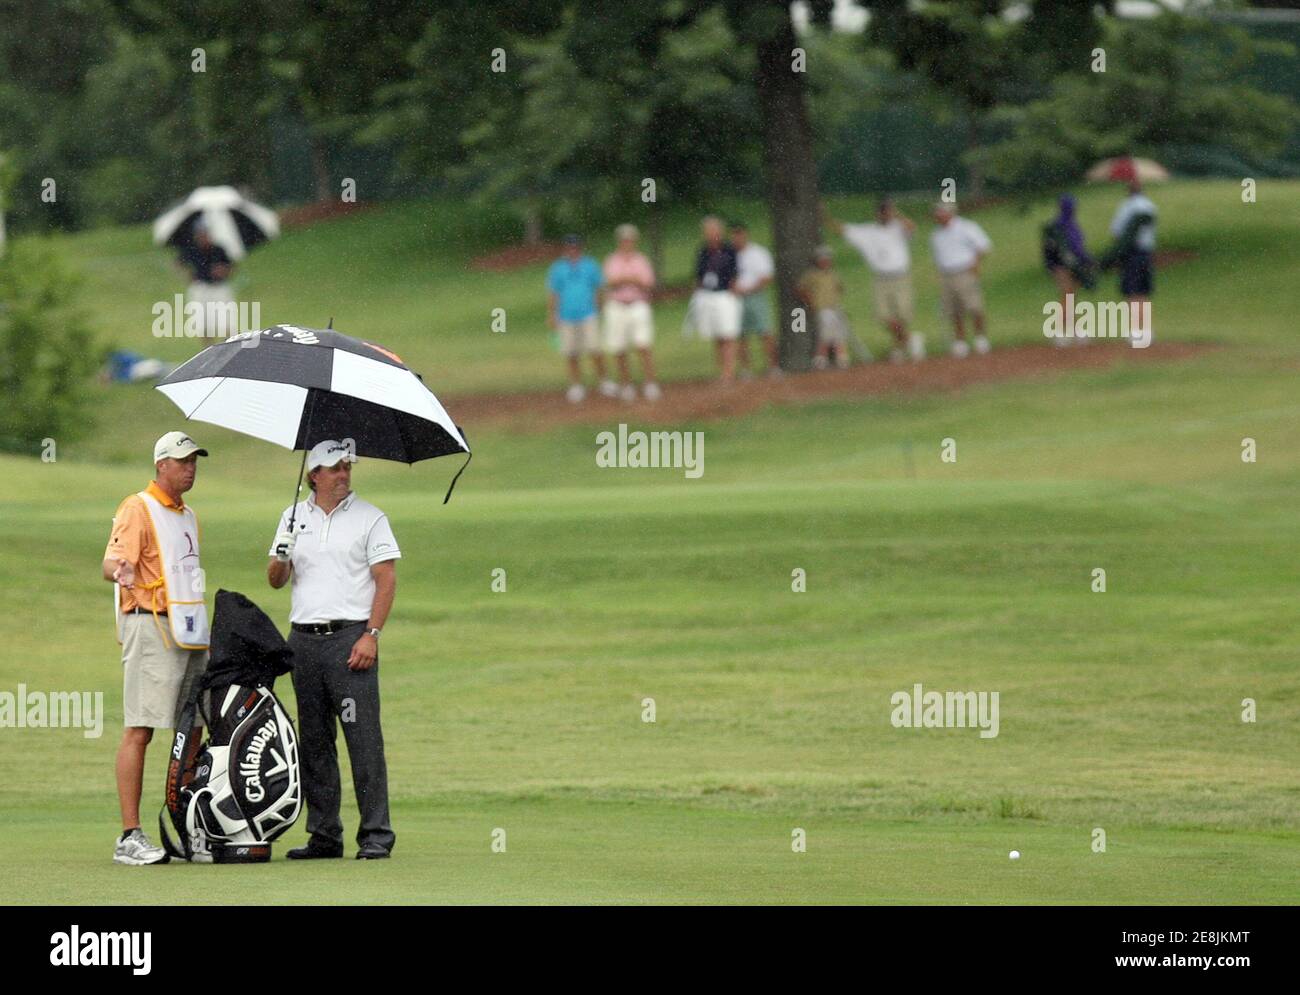 Phil Mickelson, of the U.S., with his caddy Jim Mackay (L), prepares for his shot on the 18th green during the first round of the St. Jude Classic at TPC Southwind in Memphis, Tennessee June 11, 2009.   REUTERS/Nikki Boertman    (UNITED STATES SPORT GOLF) Stock Photo